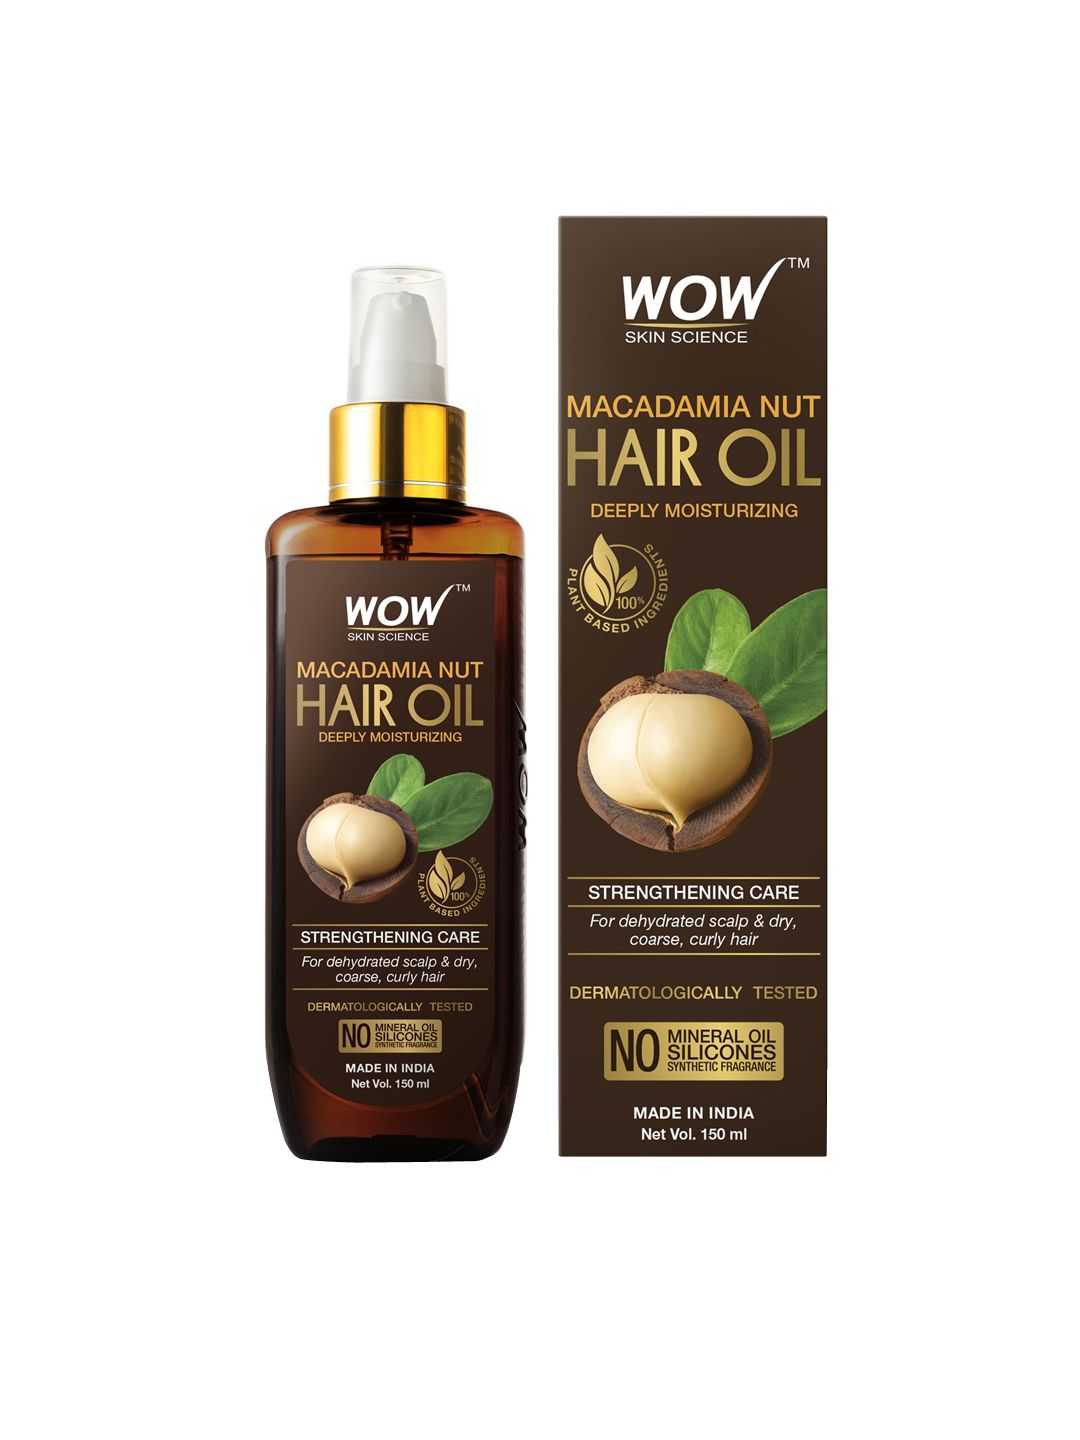 WOW SKIN SCIENCE Strengthening Care Macadamia Nut Hair Oil - 150 ml Price in India